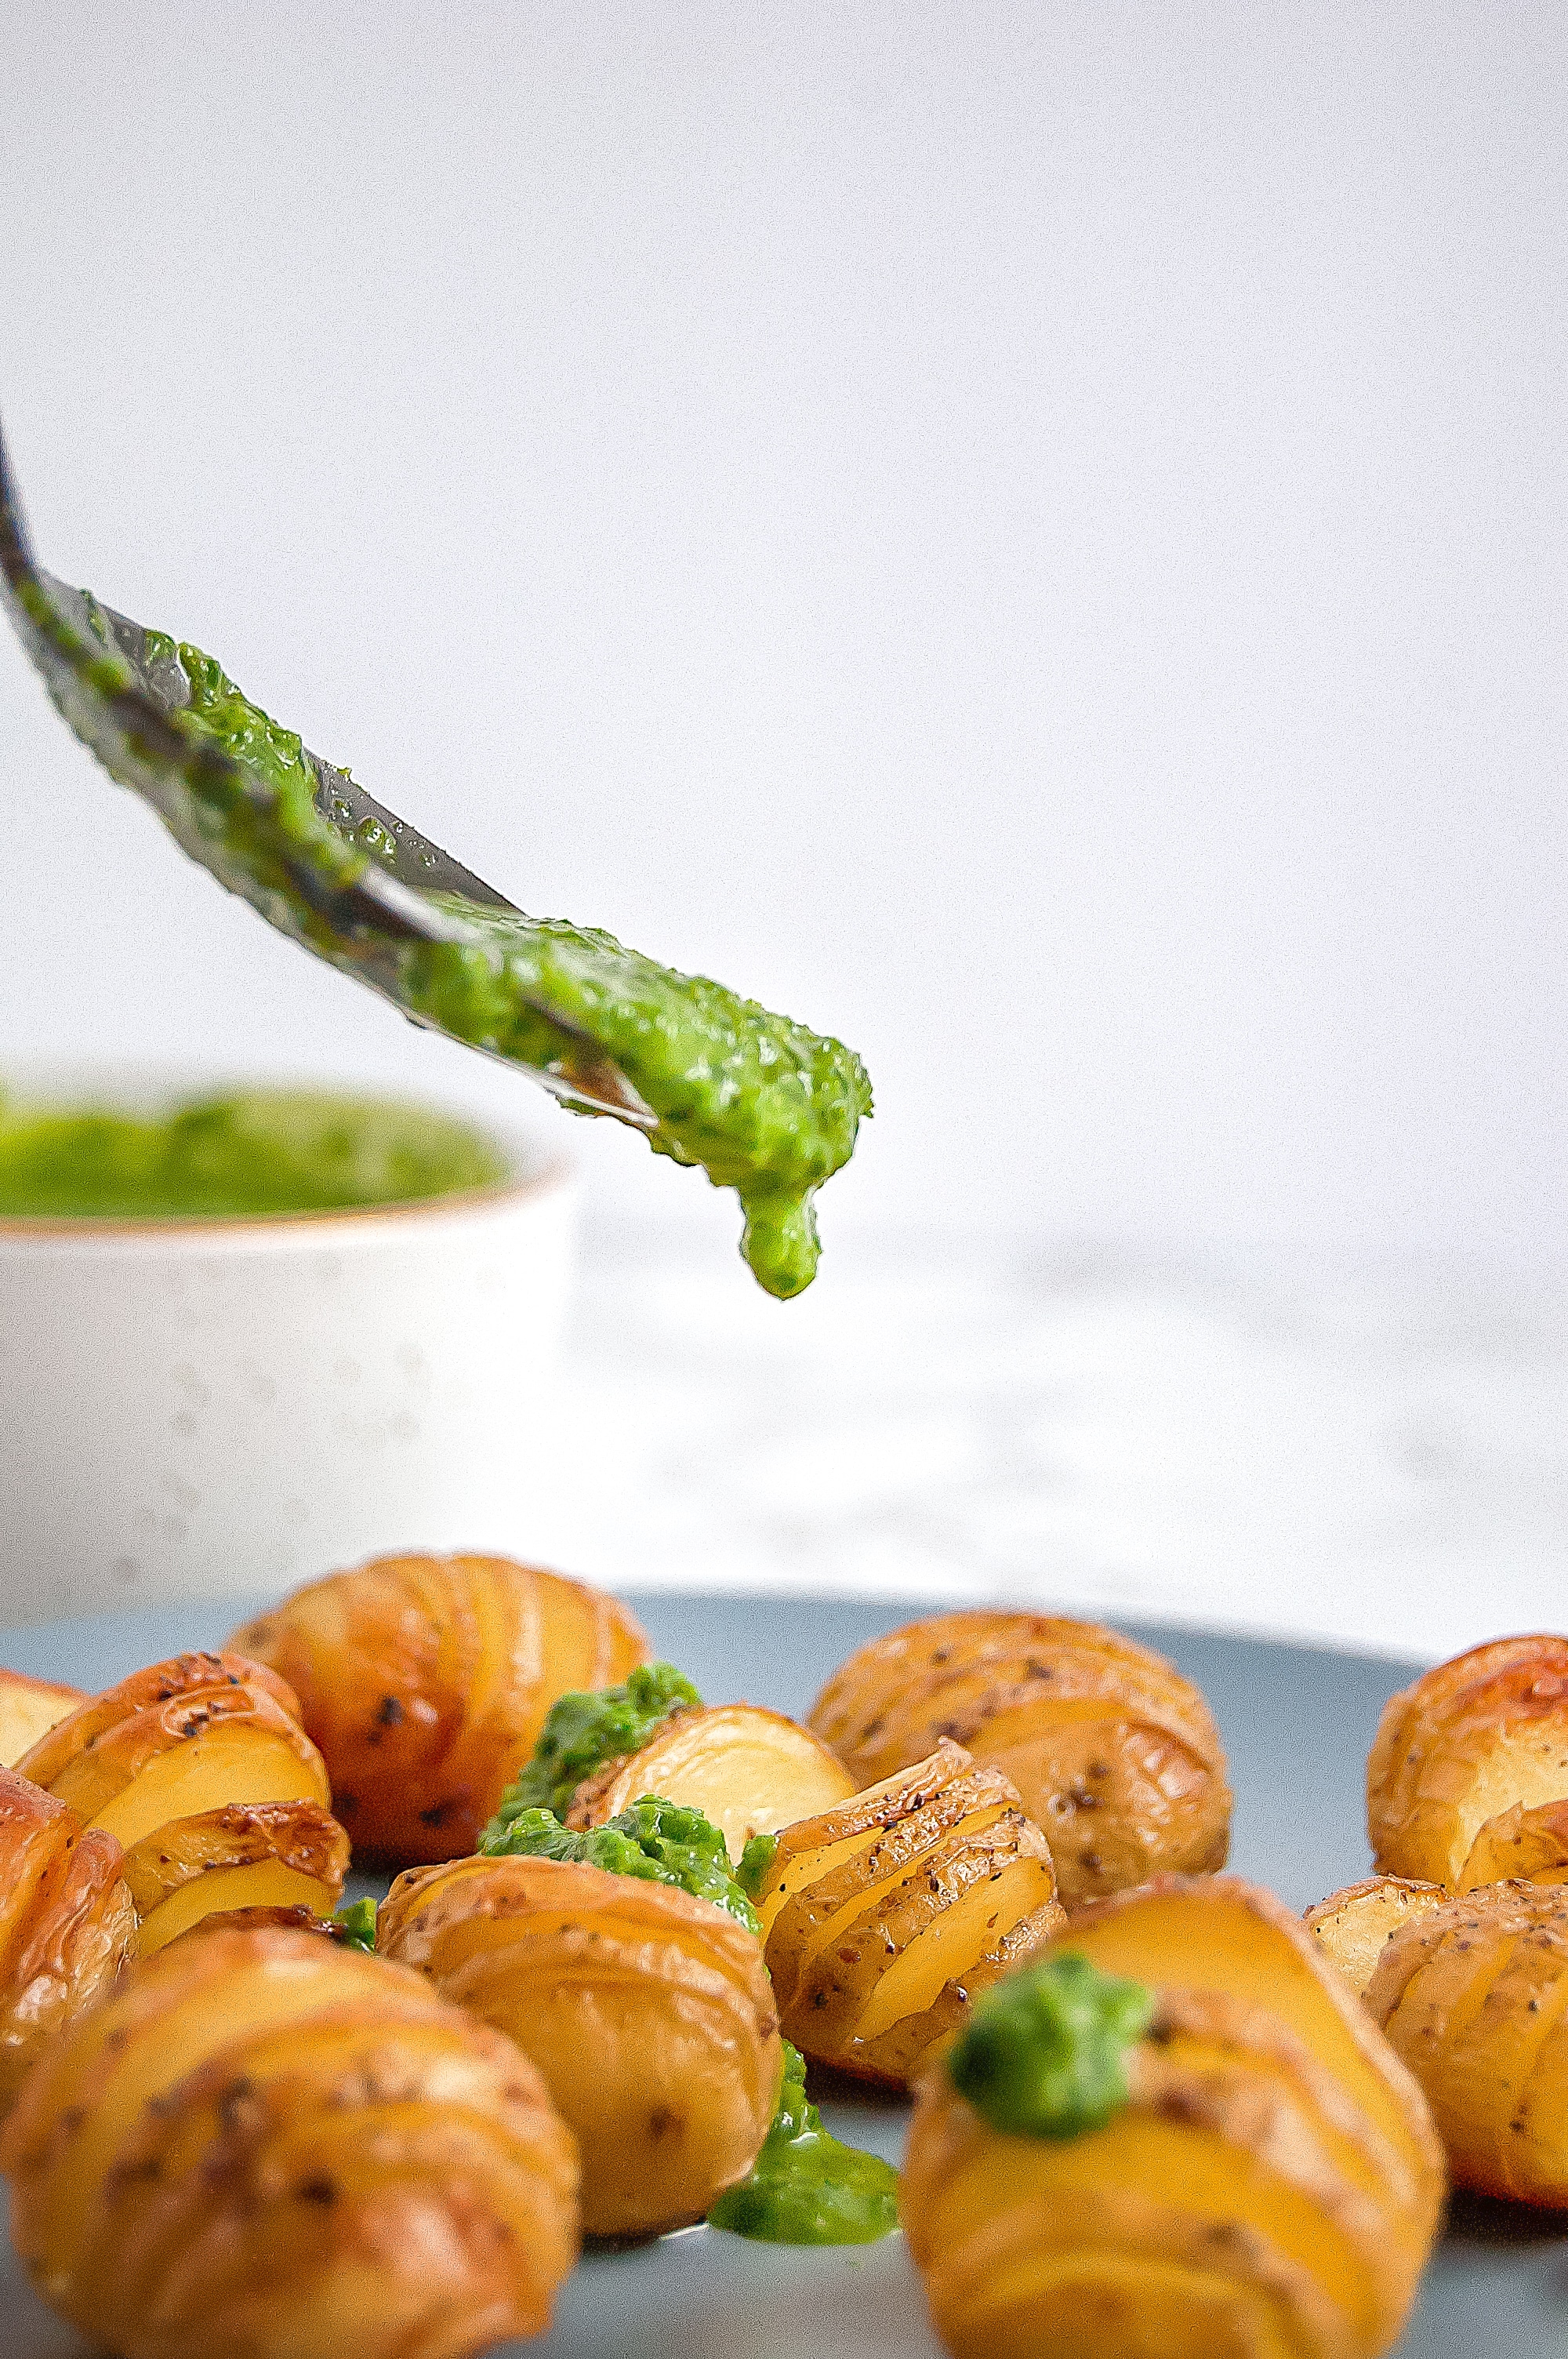 Hasselback Baby Potatoes with Orange Basil Pesto are a sophisticated, flavorful, fresh, yet simple side dish. They're gluten-free, dairy-free, nut-free, soy-free, and vegan.